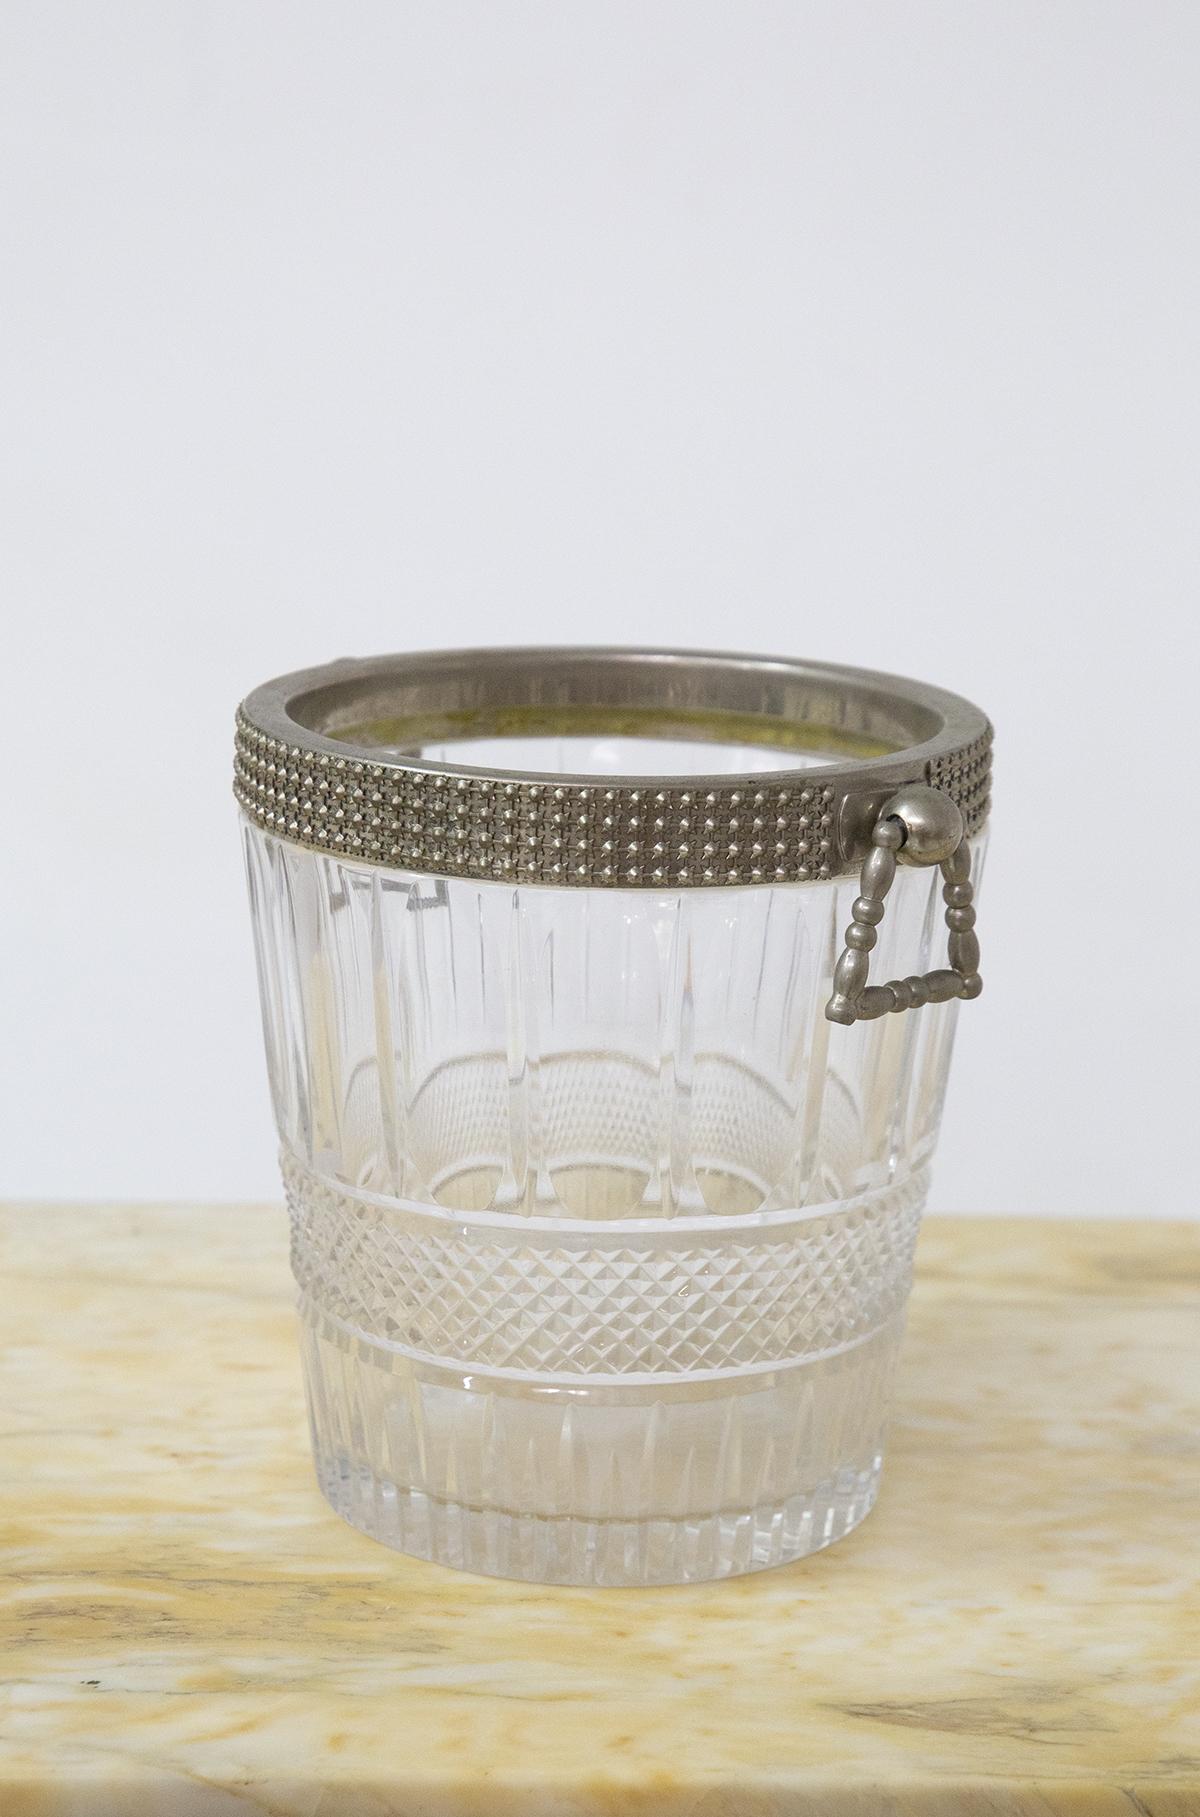 Beautiful round shaped beverage or wine basket produced in the 1950s by Baccarat, fine glassware.
The basket has a cylindrical shape made entirely of clear crystal, with various workings and inserts, making it a star piece on the table.
At the top